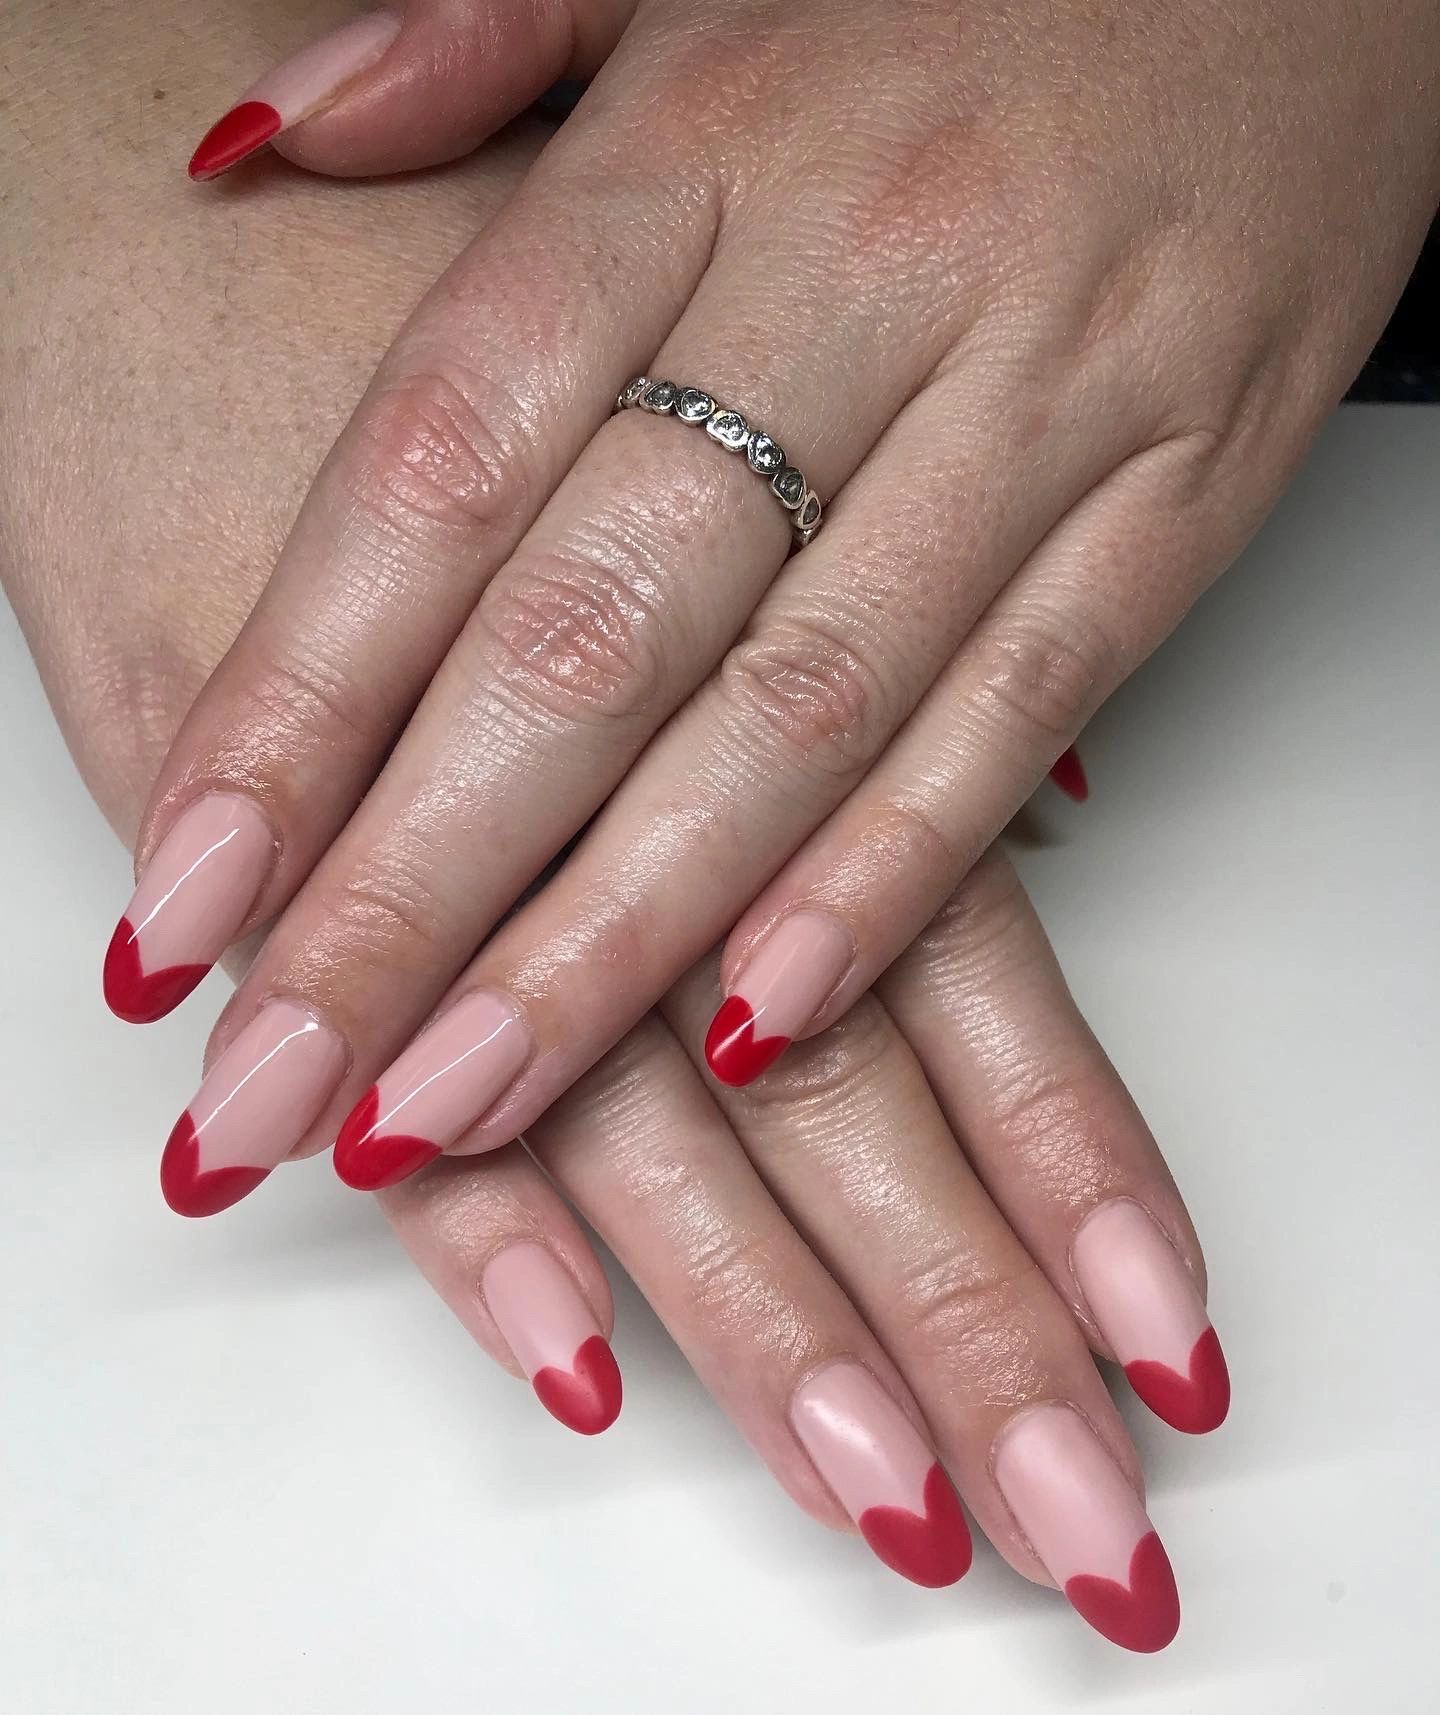 Nail Salons That Do Gel Extensions Near Me - Nail and ...